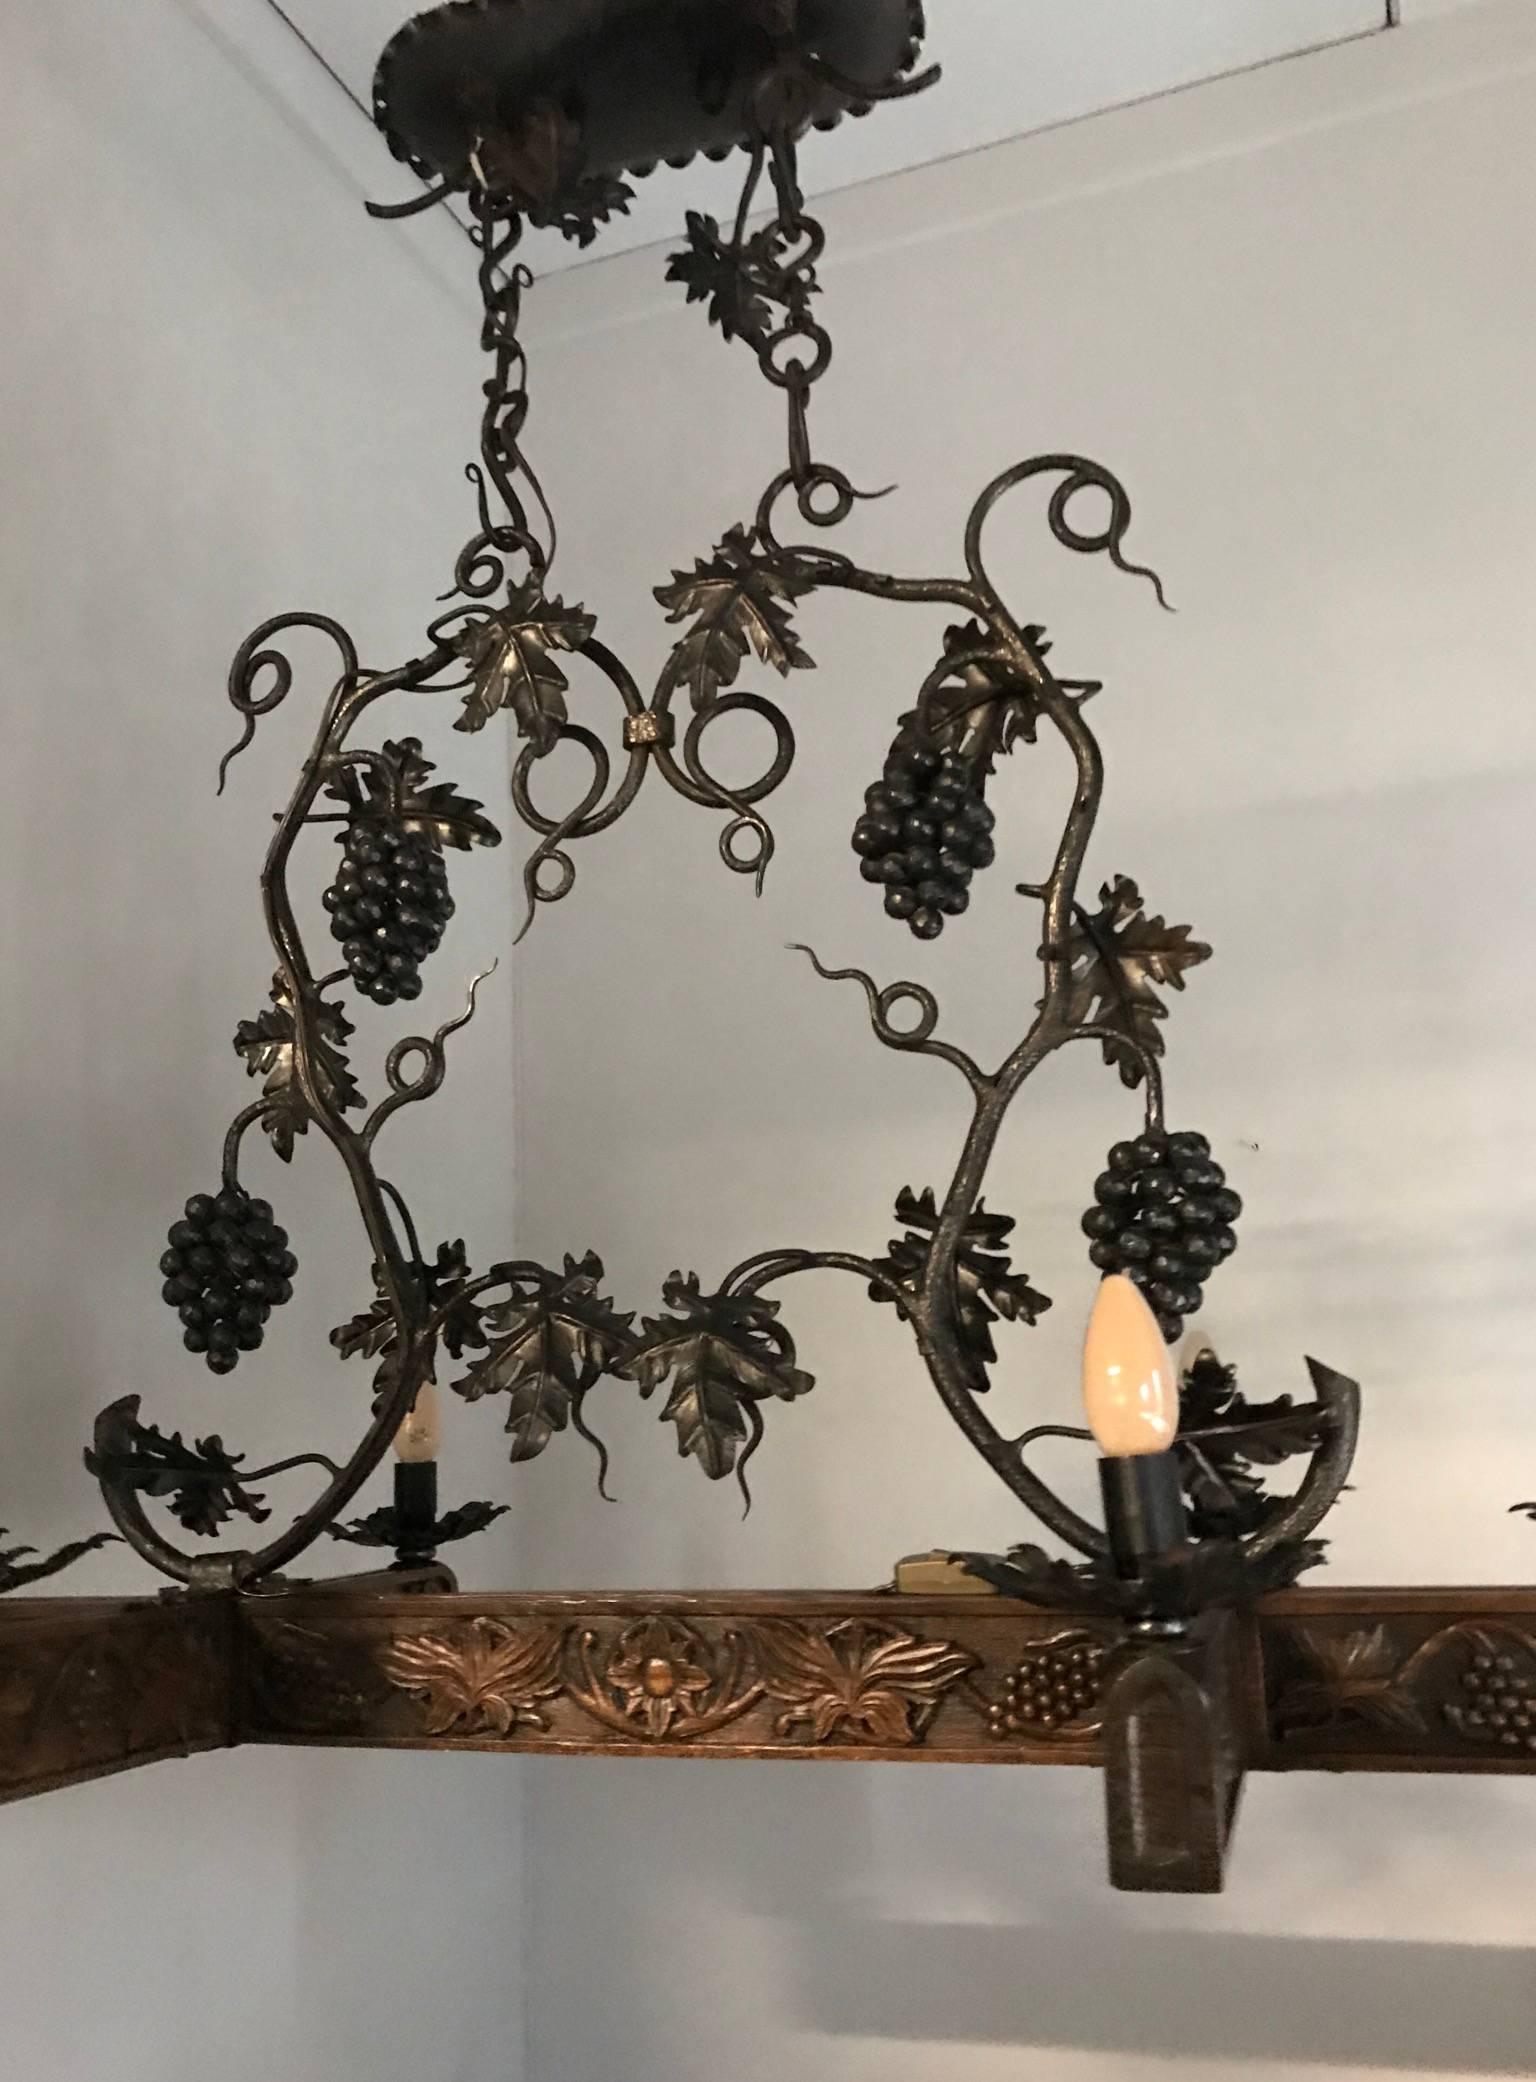 Stunning & Horizontal Wrought Iron Chandelier with Grapes & Hand-Carved Branches 4